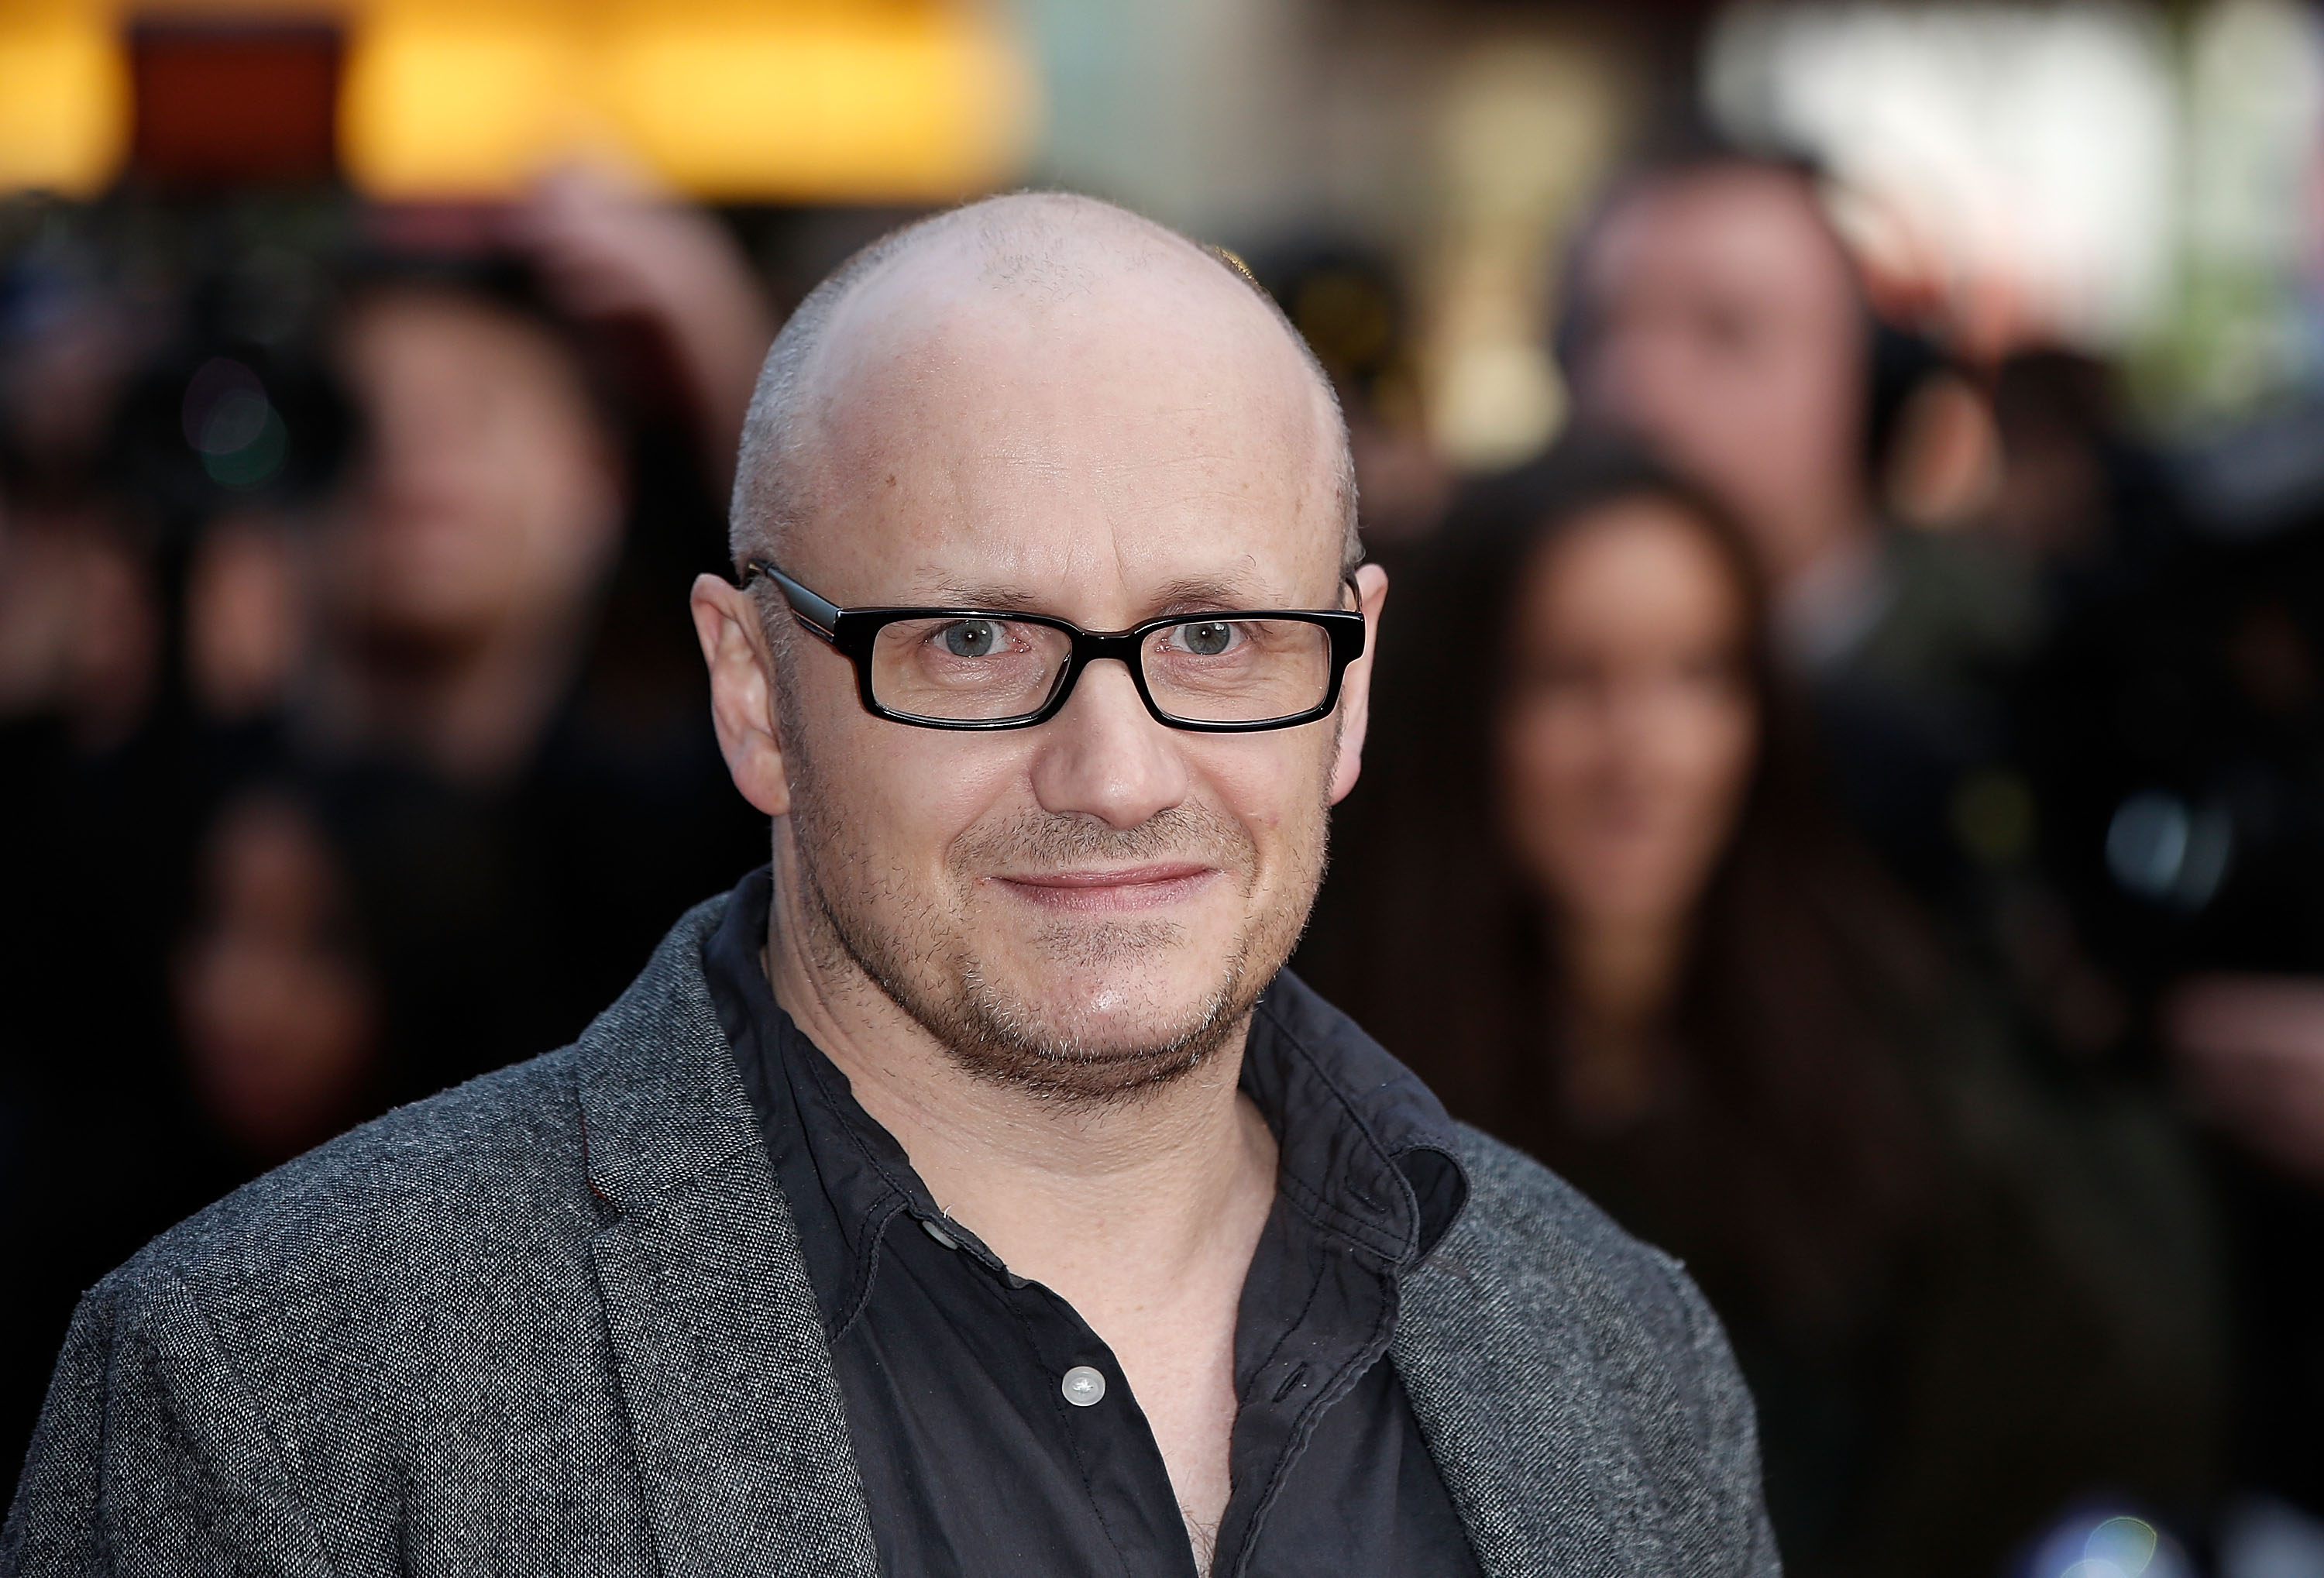 LONDON, ENGLAND - OCTOBER 11: Director Lenny Abrahamson attends a screening during the BFI London Film Festival at Vue Leicester Square on October 11, 2015 in London, England. (Photo by John Phillips/Getty Images for BFI)